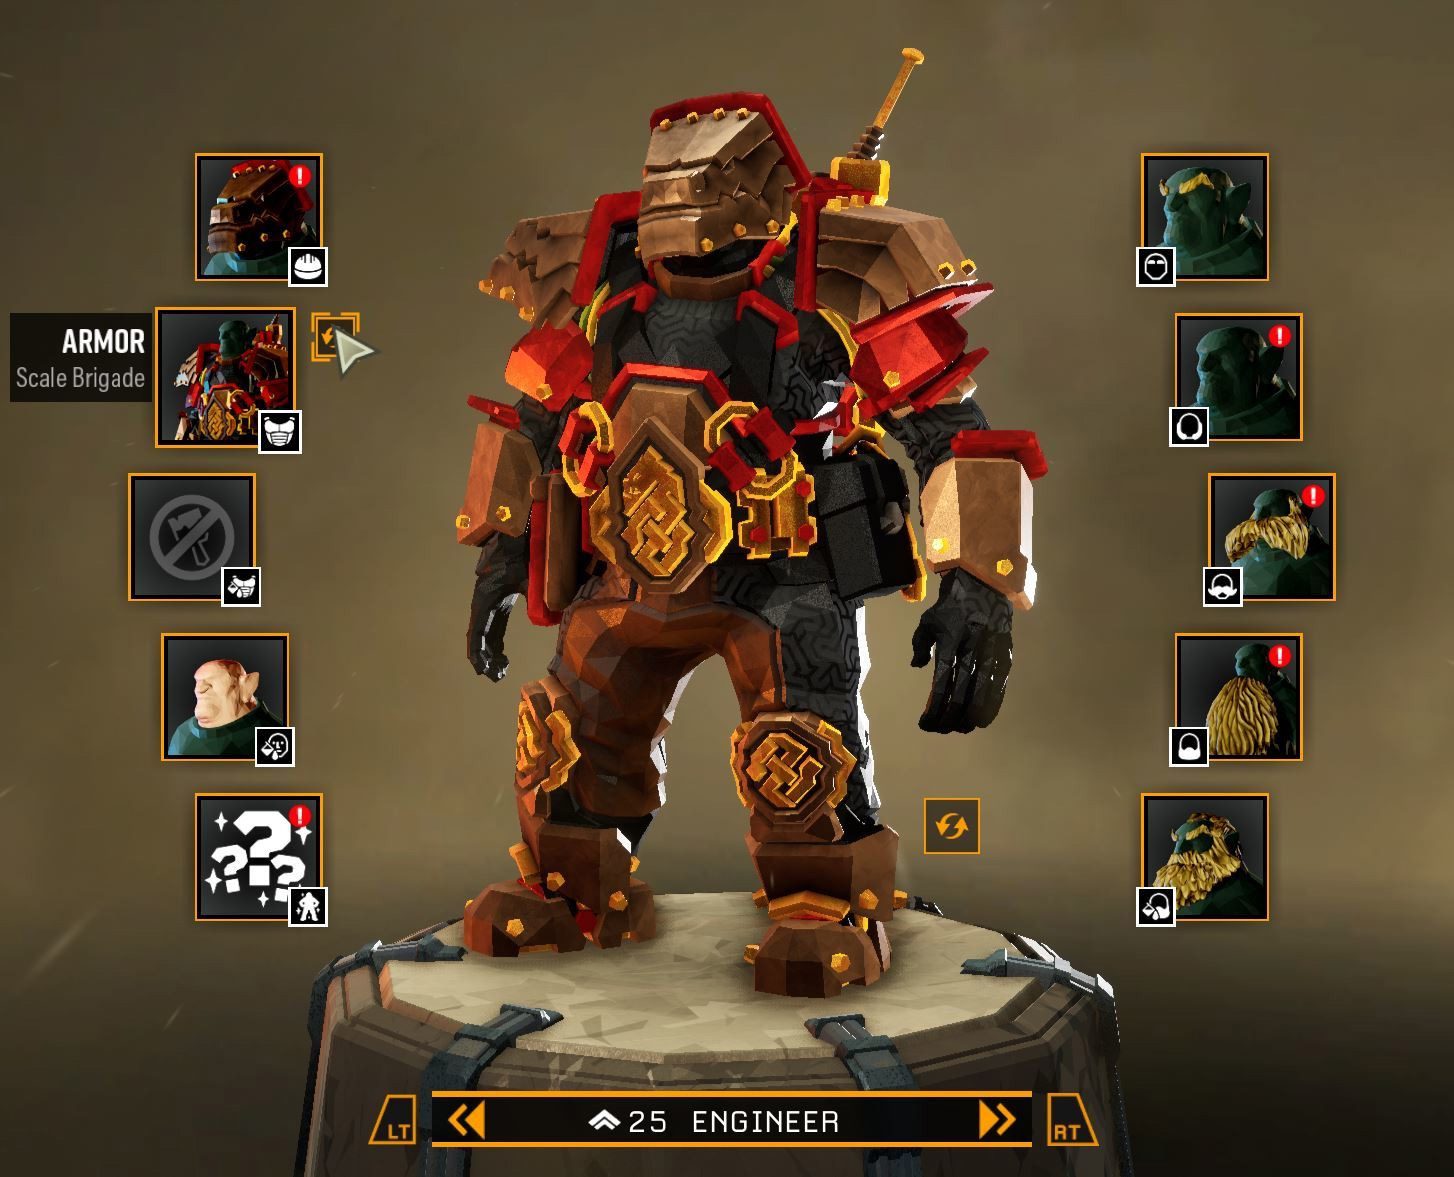 Everyone can unlock the Scale Brigade Armor until March 14, after which point it's limited to Rank 100 players and up.